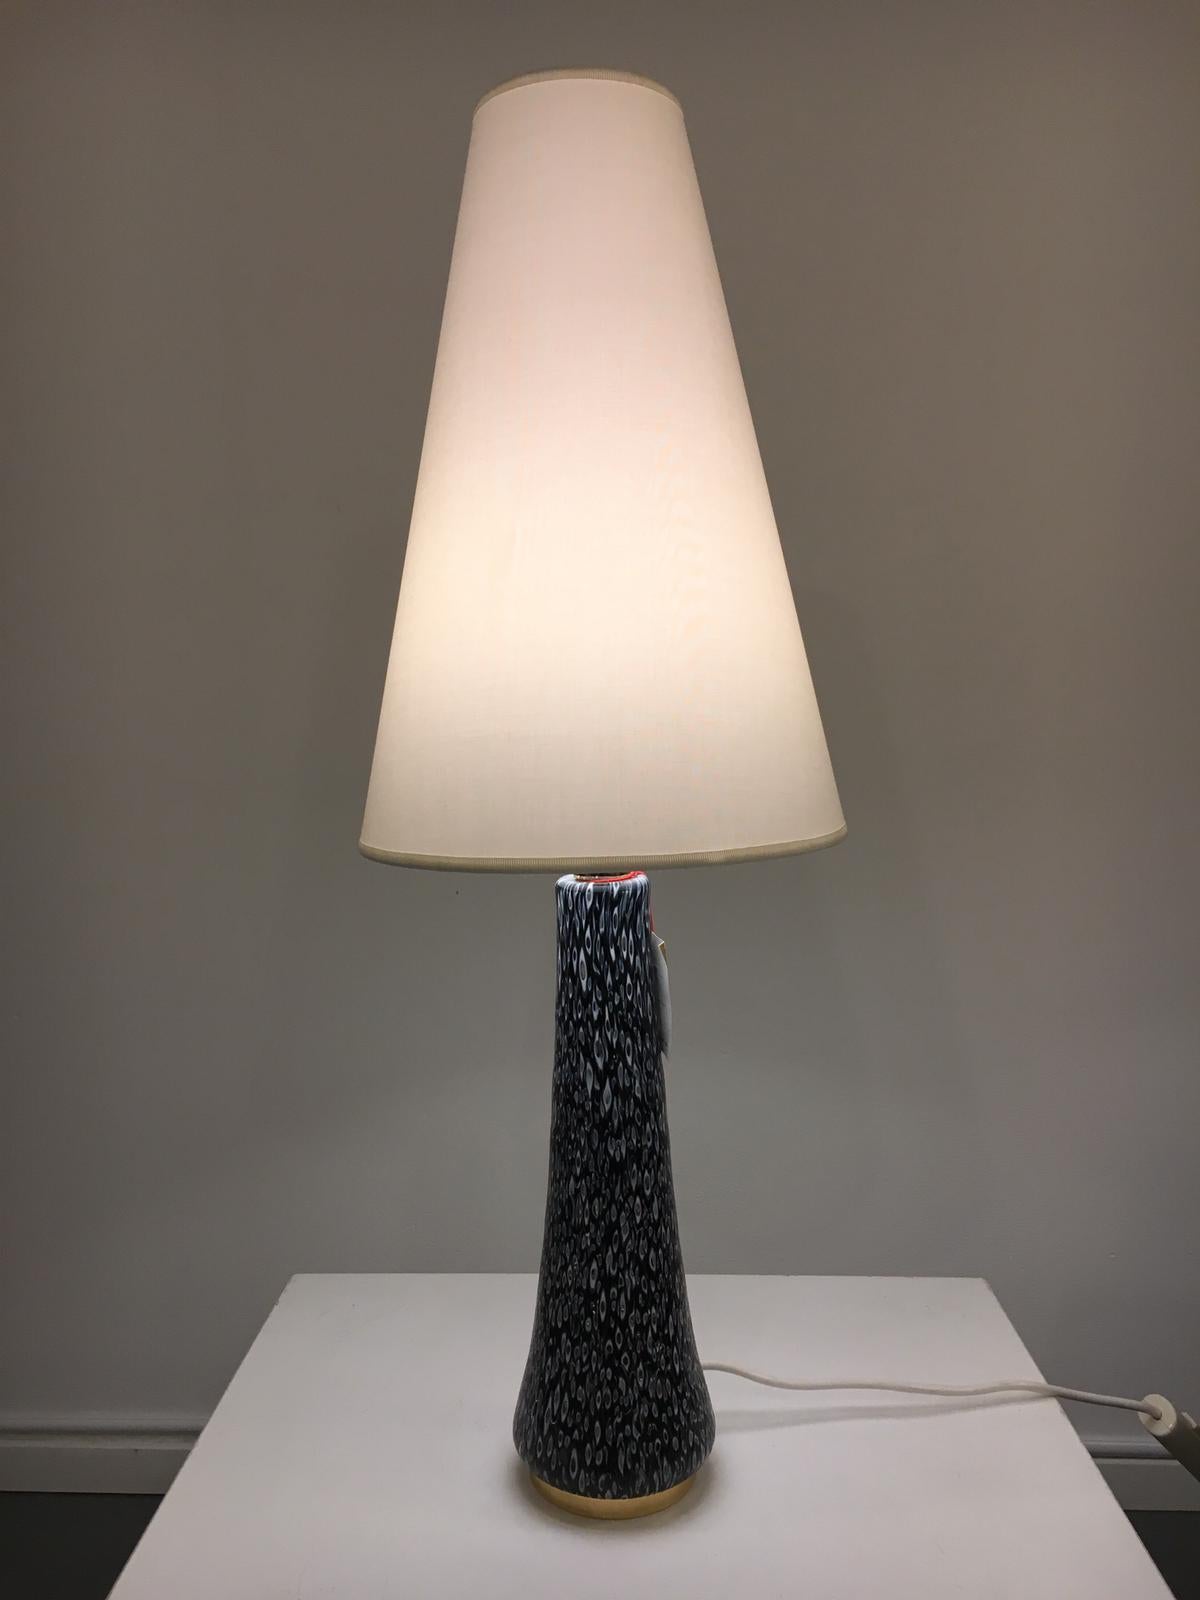 This elegant table lamp, model “Hermes”, is an original vintage piece by Angelo Brotto, manufactured by Esperia in Italy, circa 1980.

The base of the lamp is made of high quality, deep blue Murano glass with a lovely detailed pattern within the